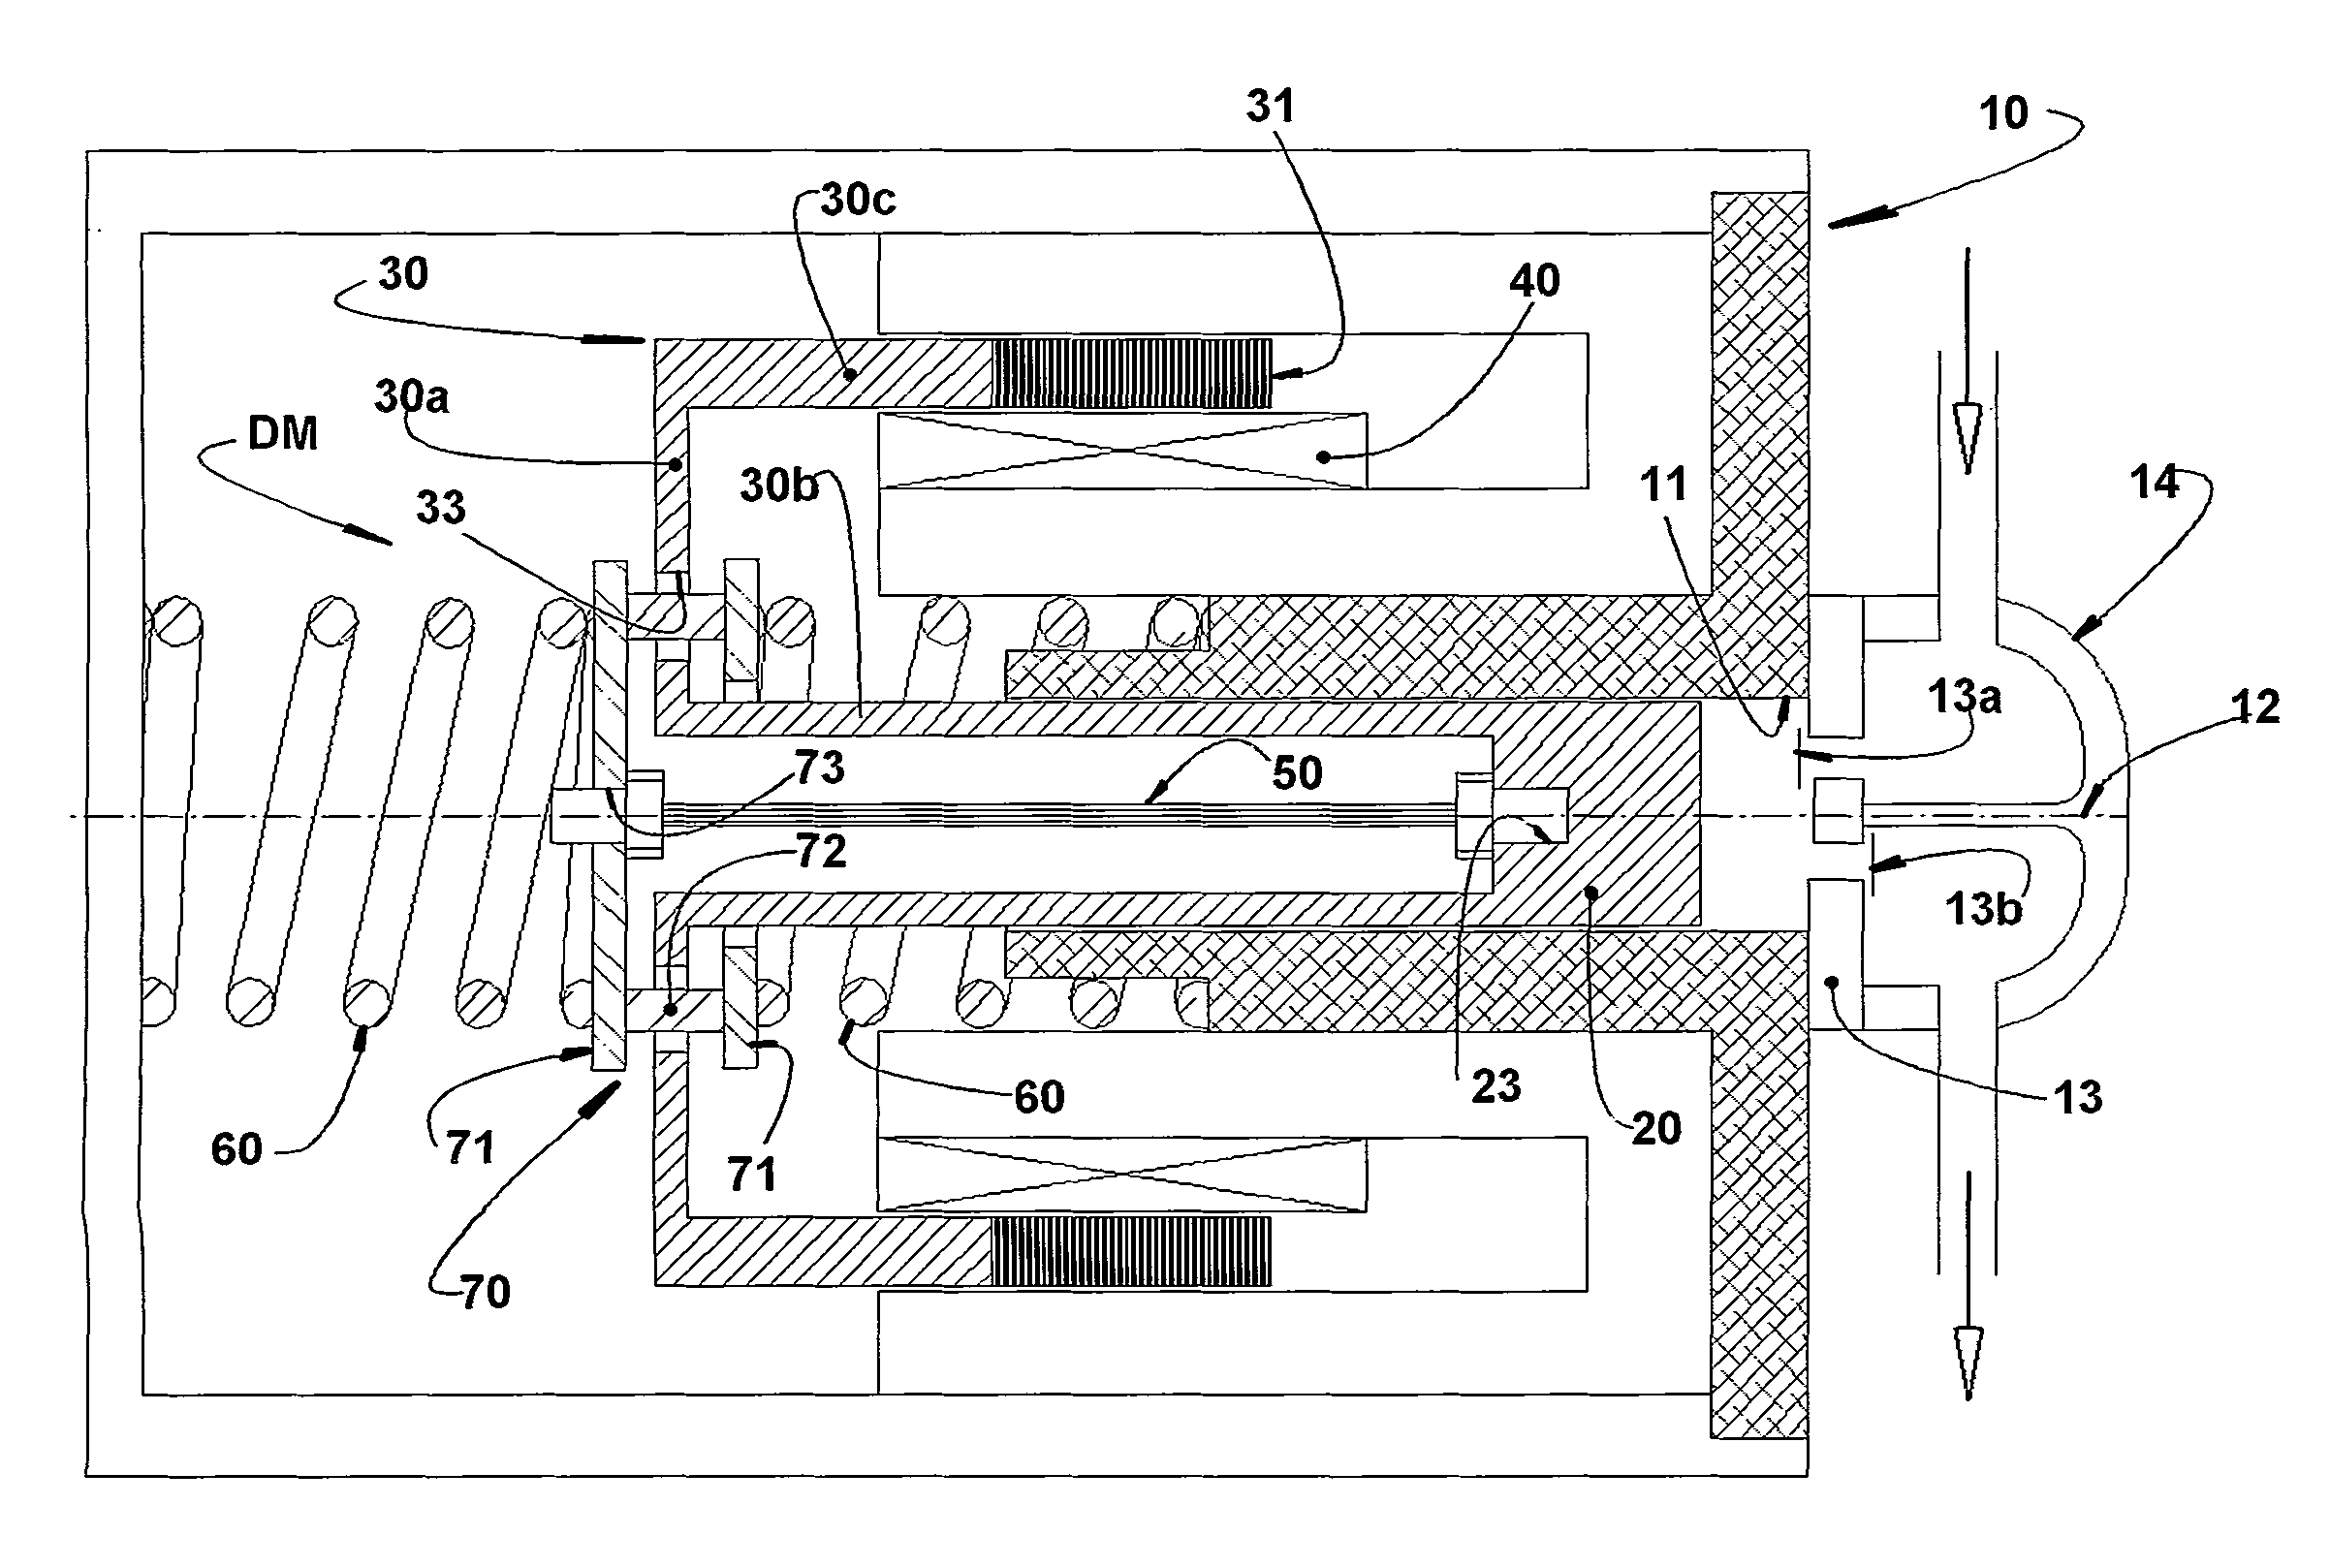 Driving Rod For The Piston Of A Reciprocating Compressor